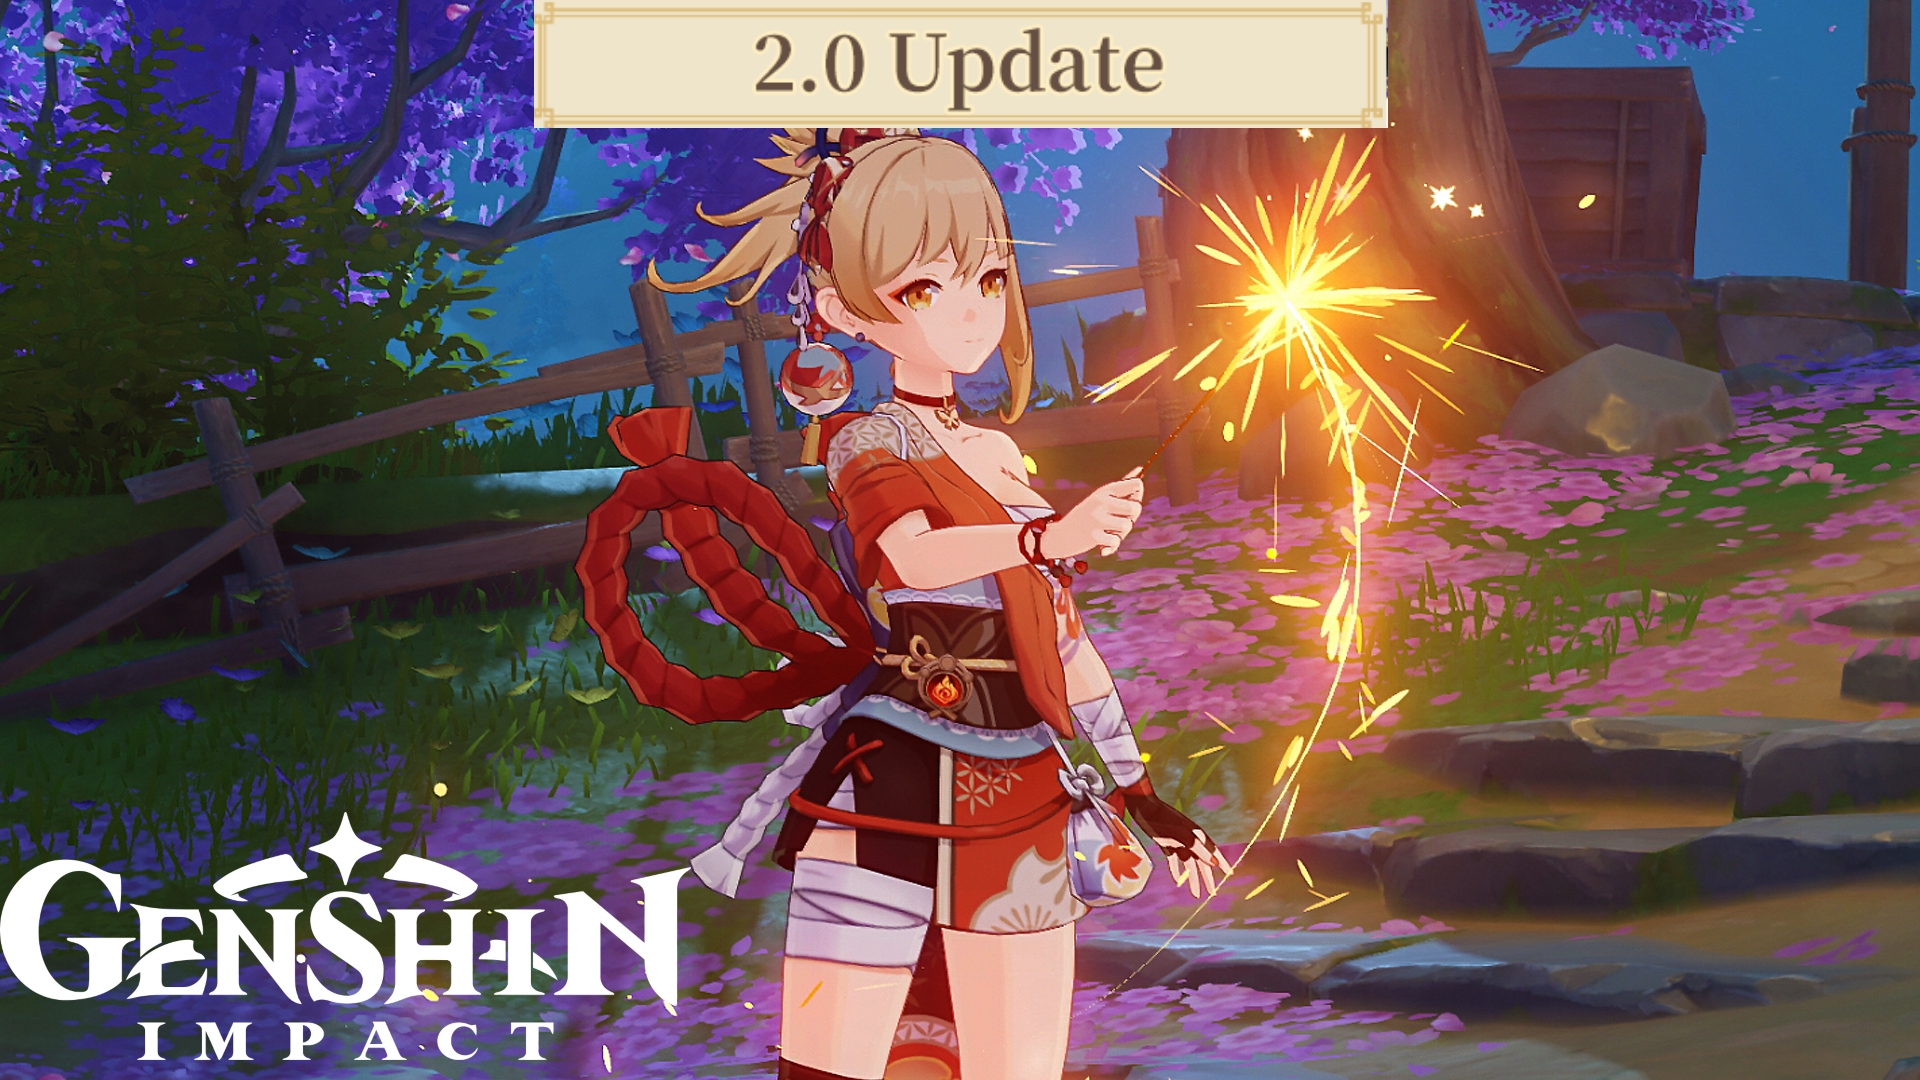 Read more about the article Genshin Impact 2.0 release date,size,characters,events, and more